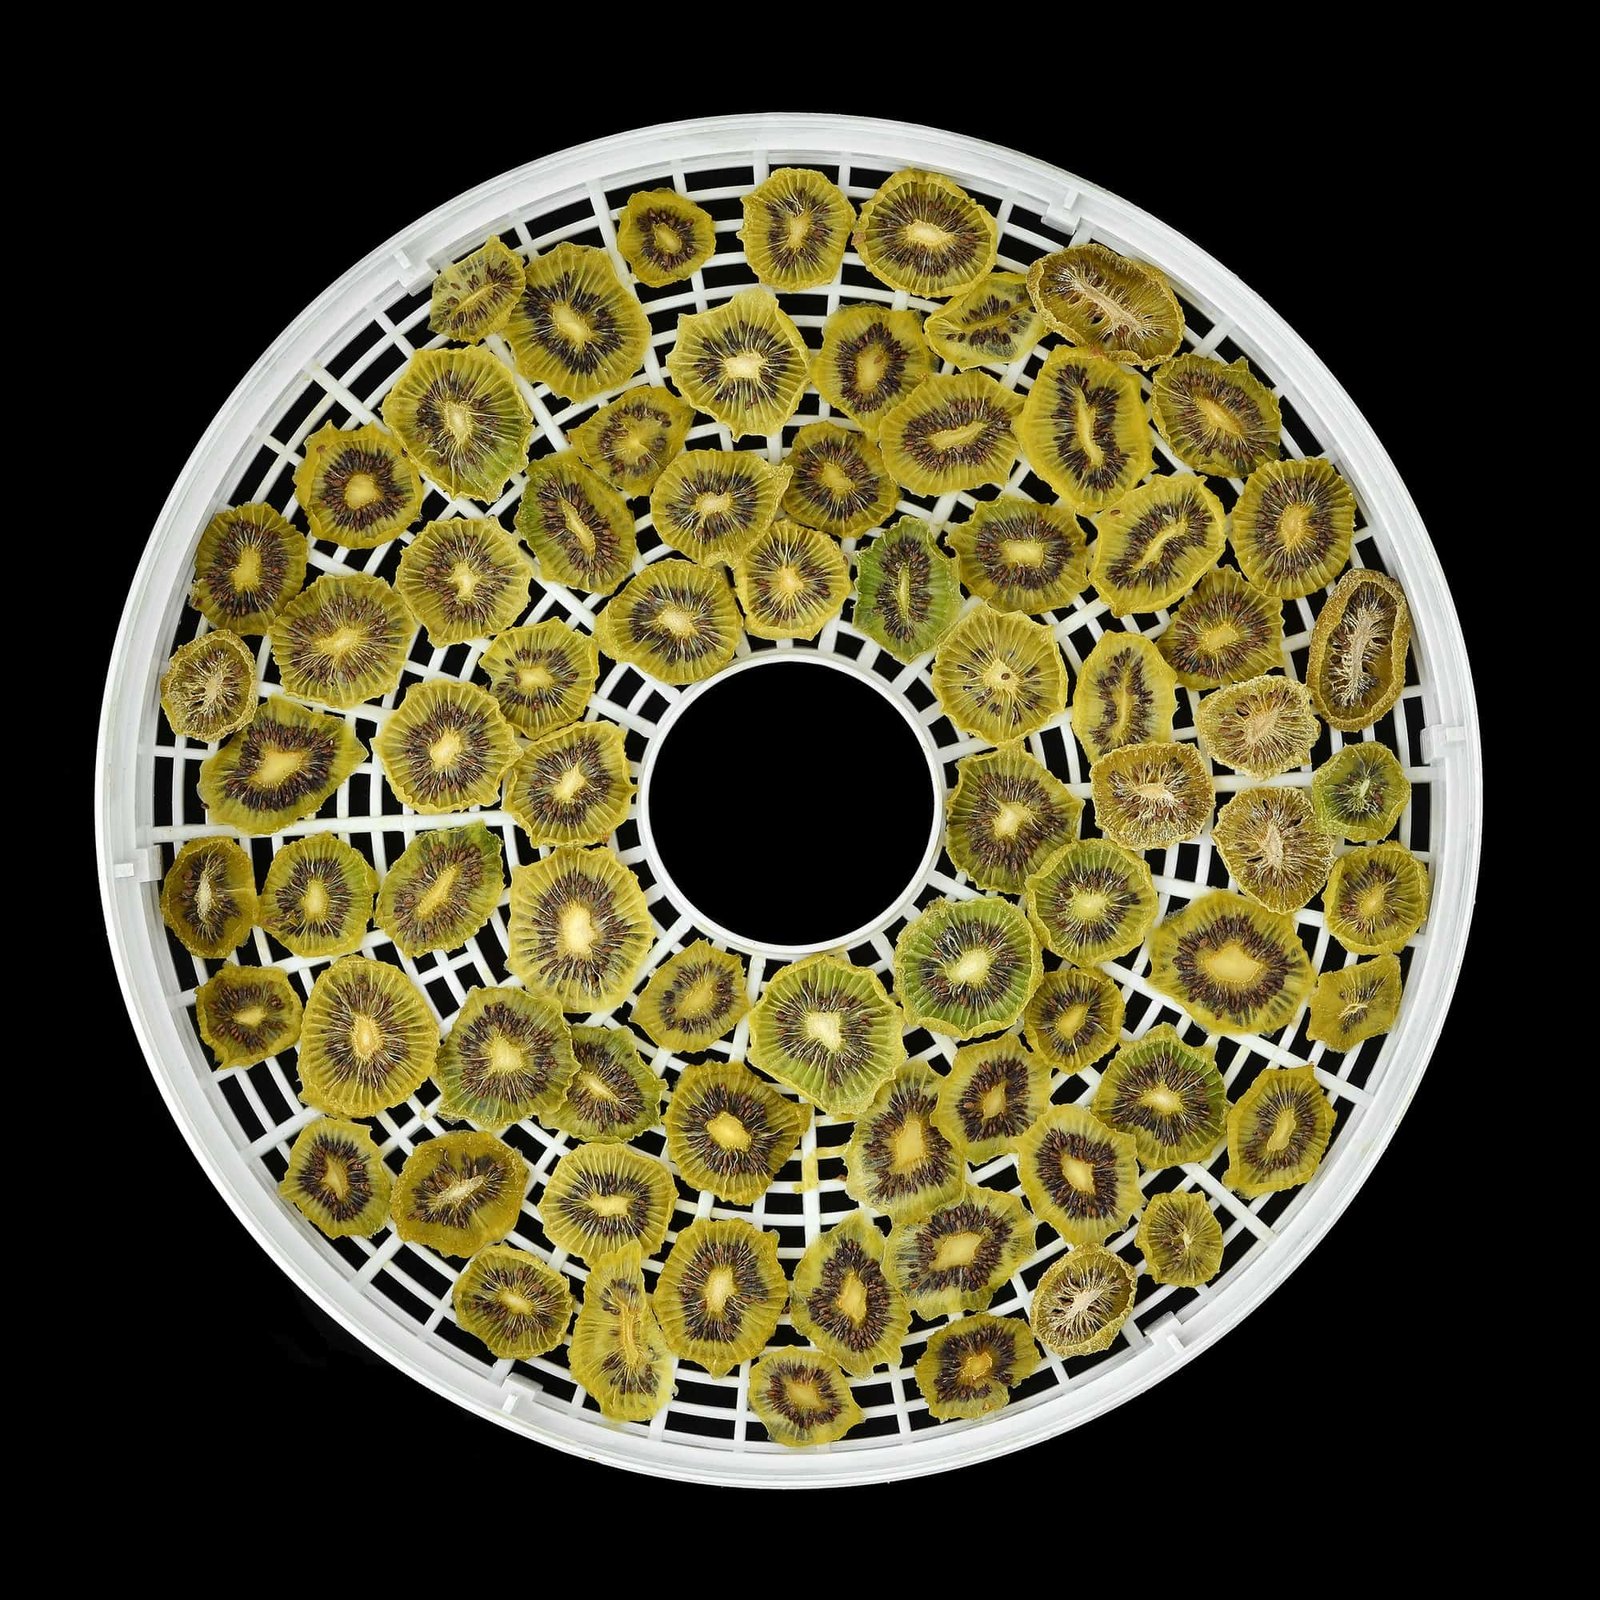 dehydrated kiwis in a circle dehydrator tray over a black background